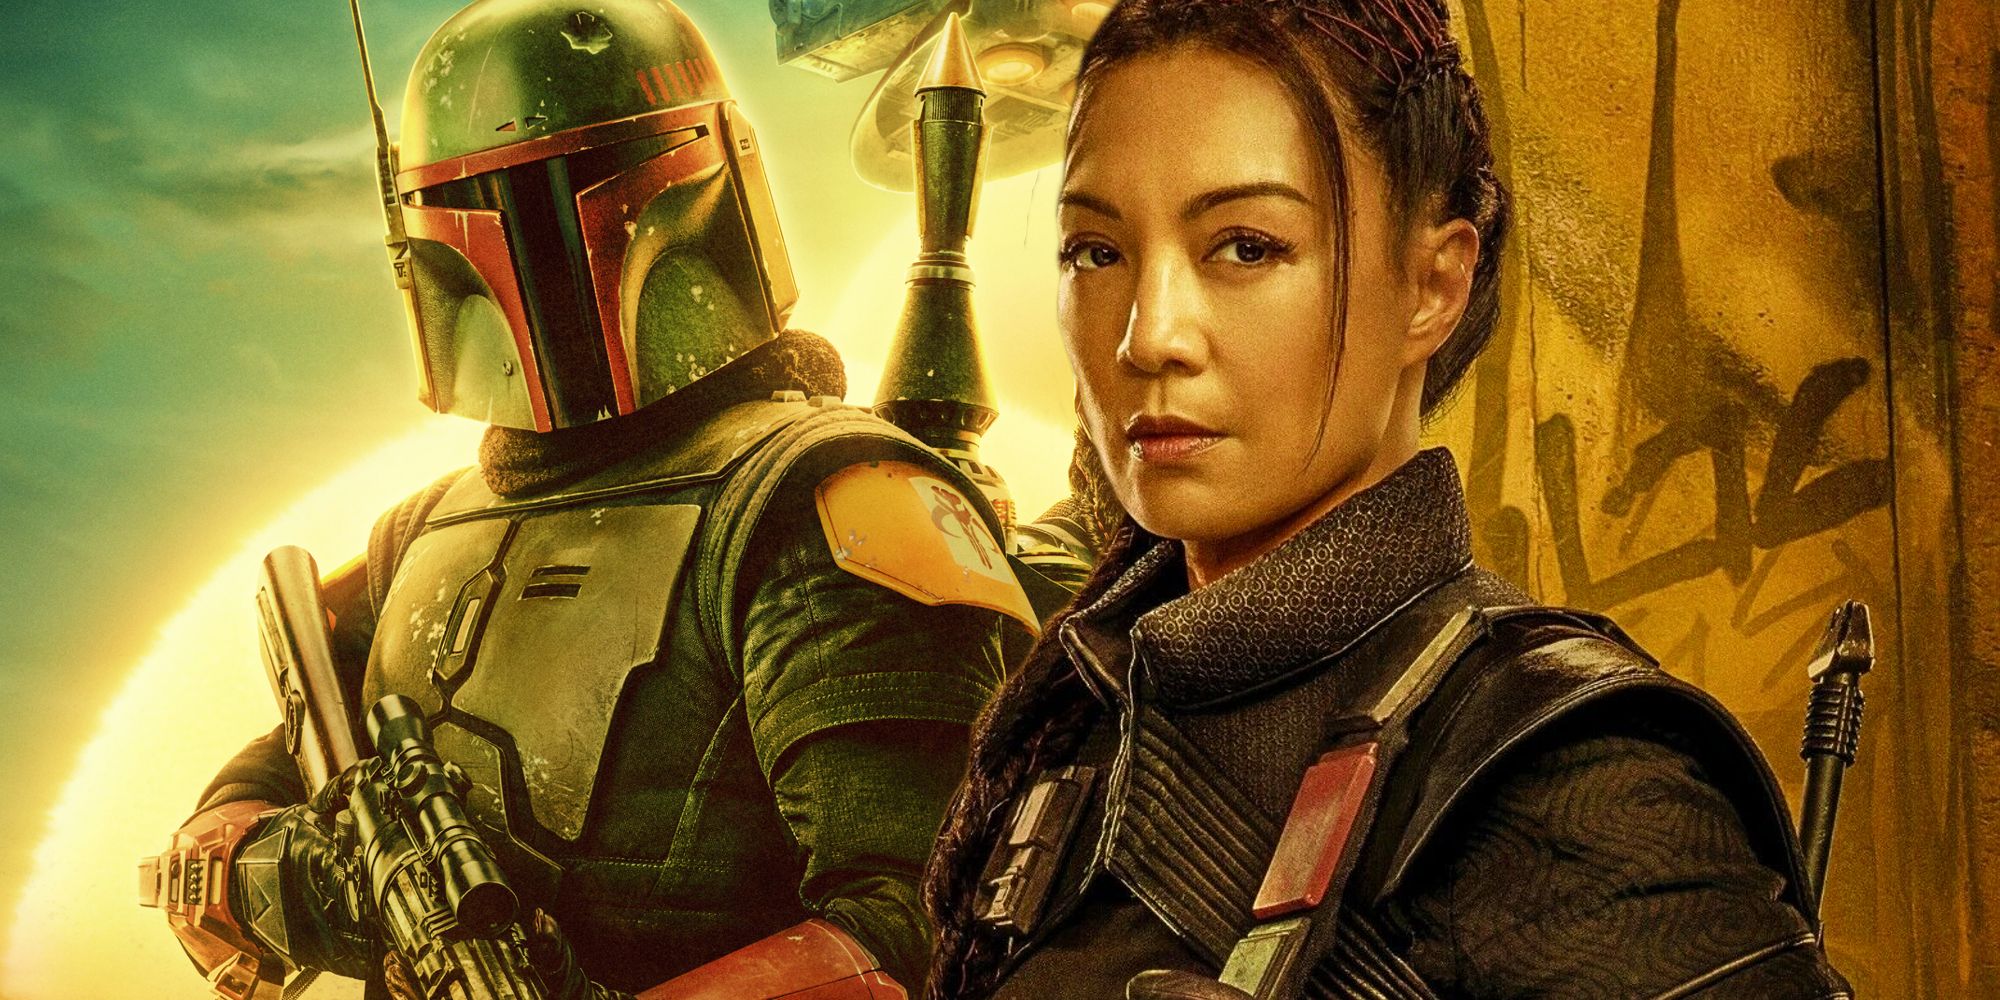 The poster for The Book of Boba Fett next to Ming-Na Wen as Fennec Shand